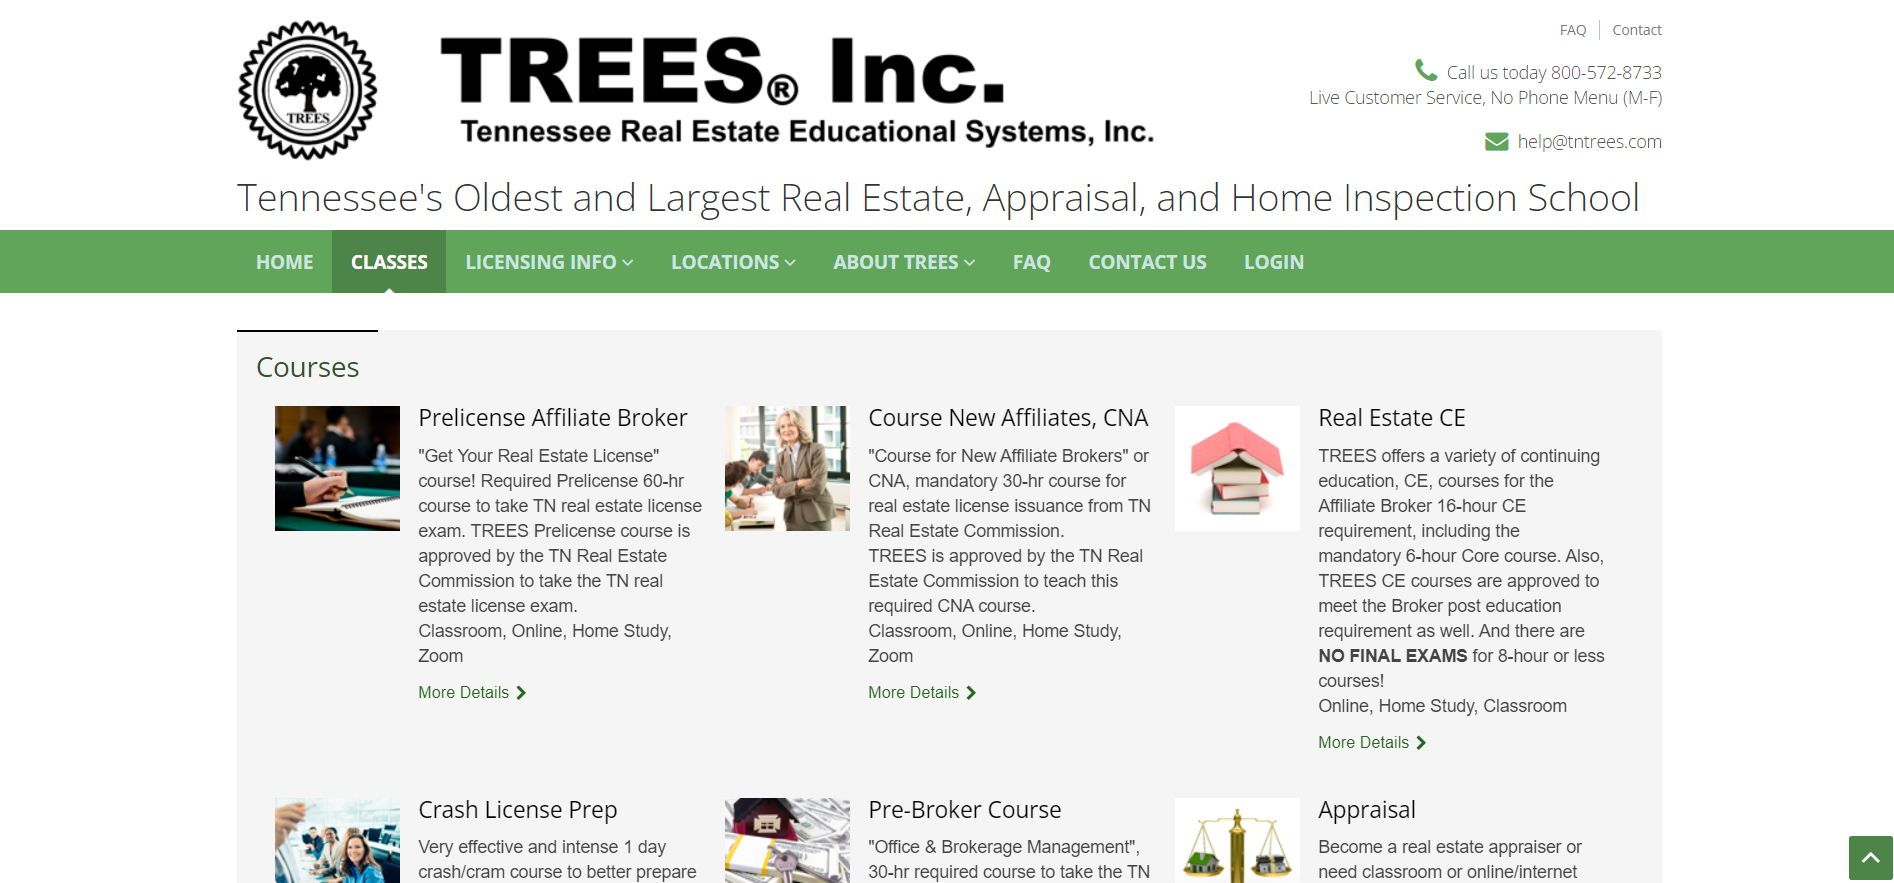 Advertisement for Real Estate courses from Tennessee Real Estate Educational Systems.